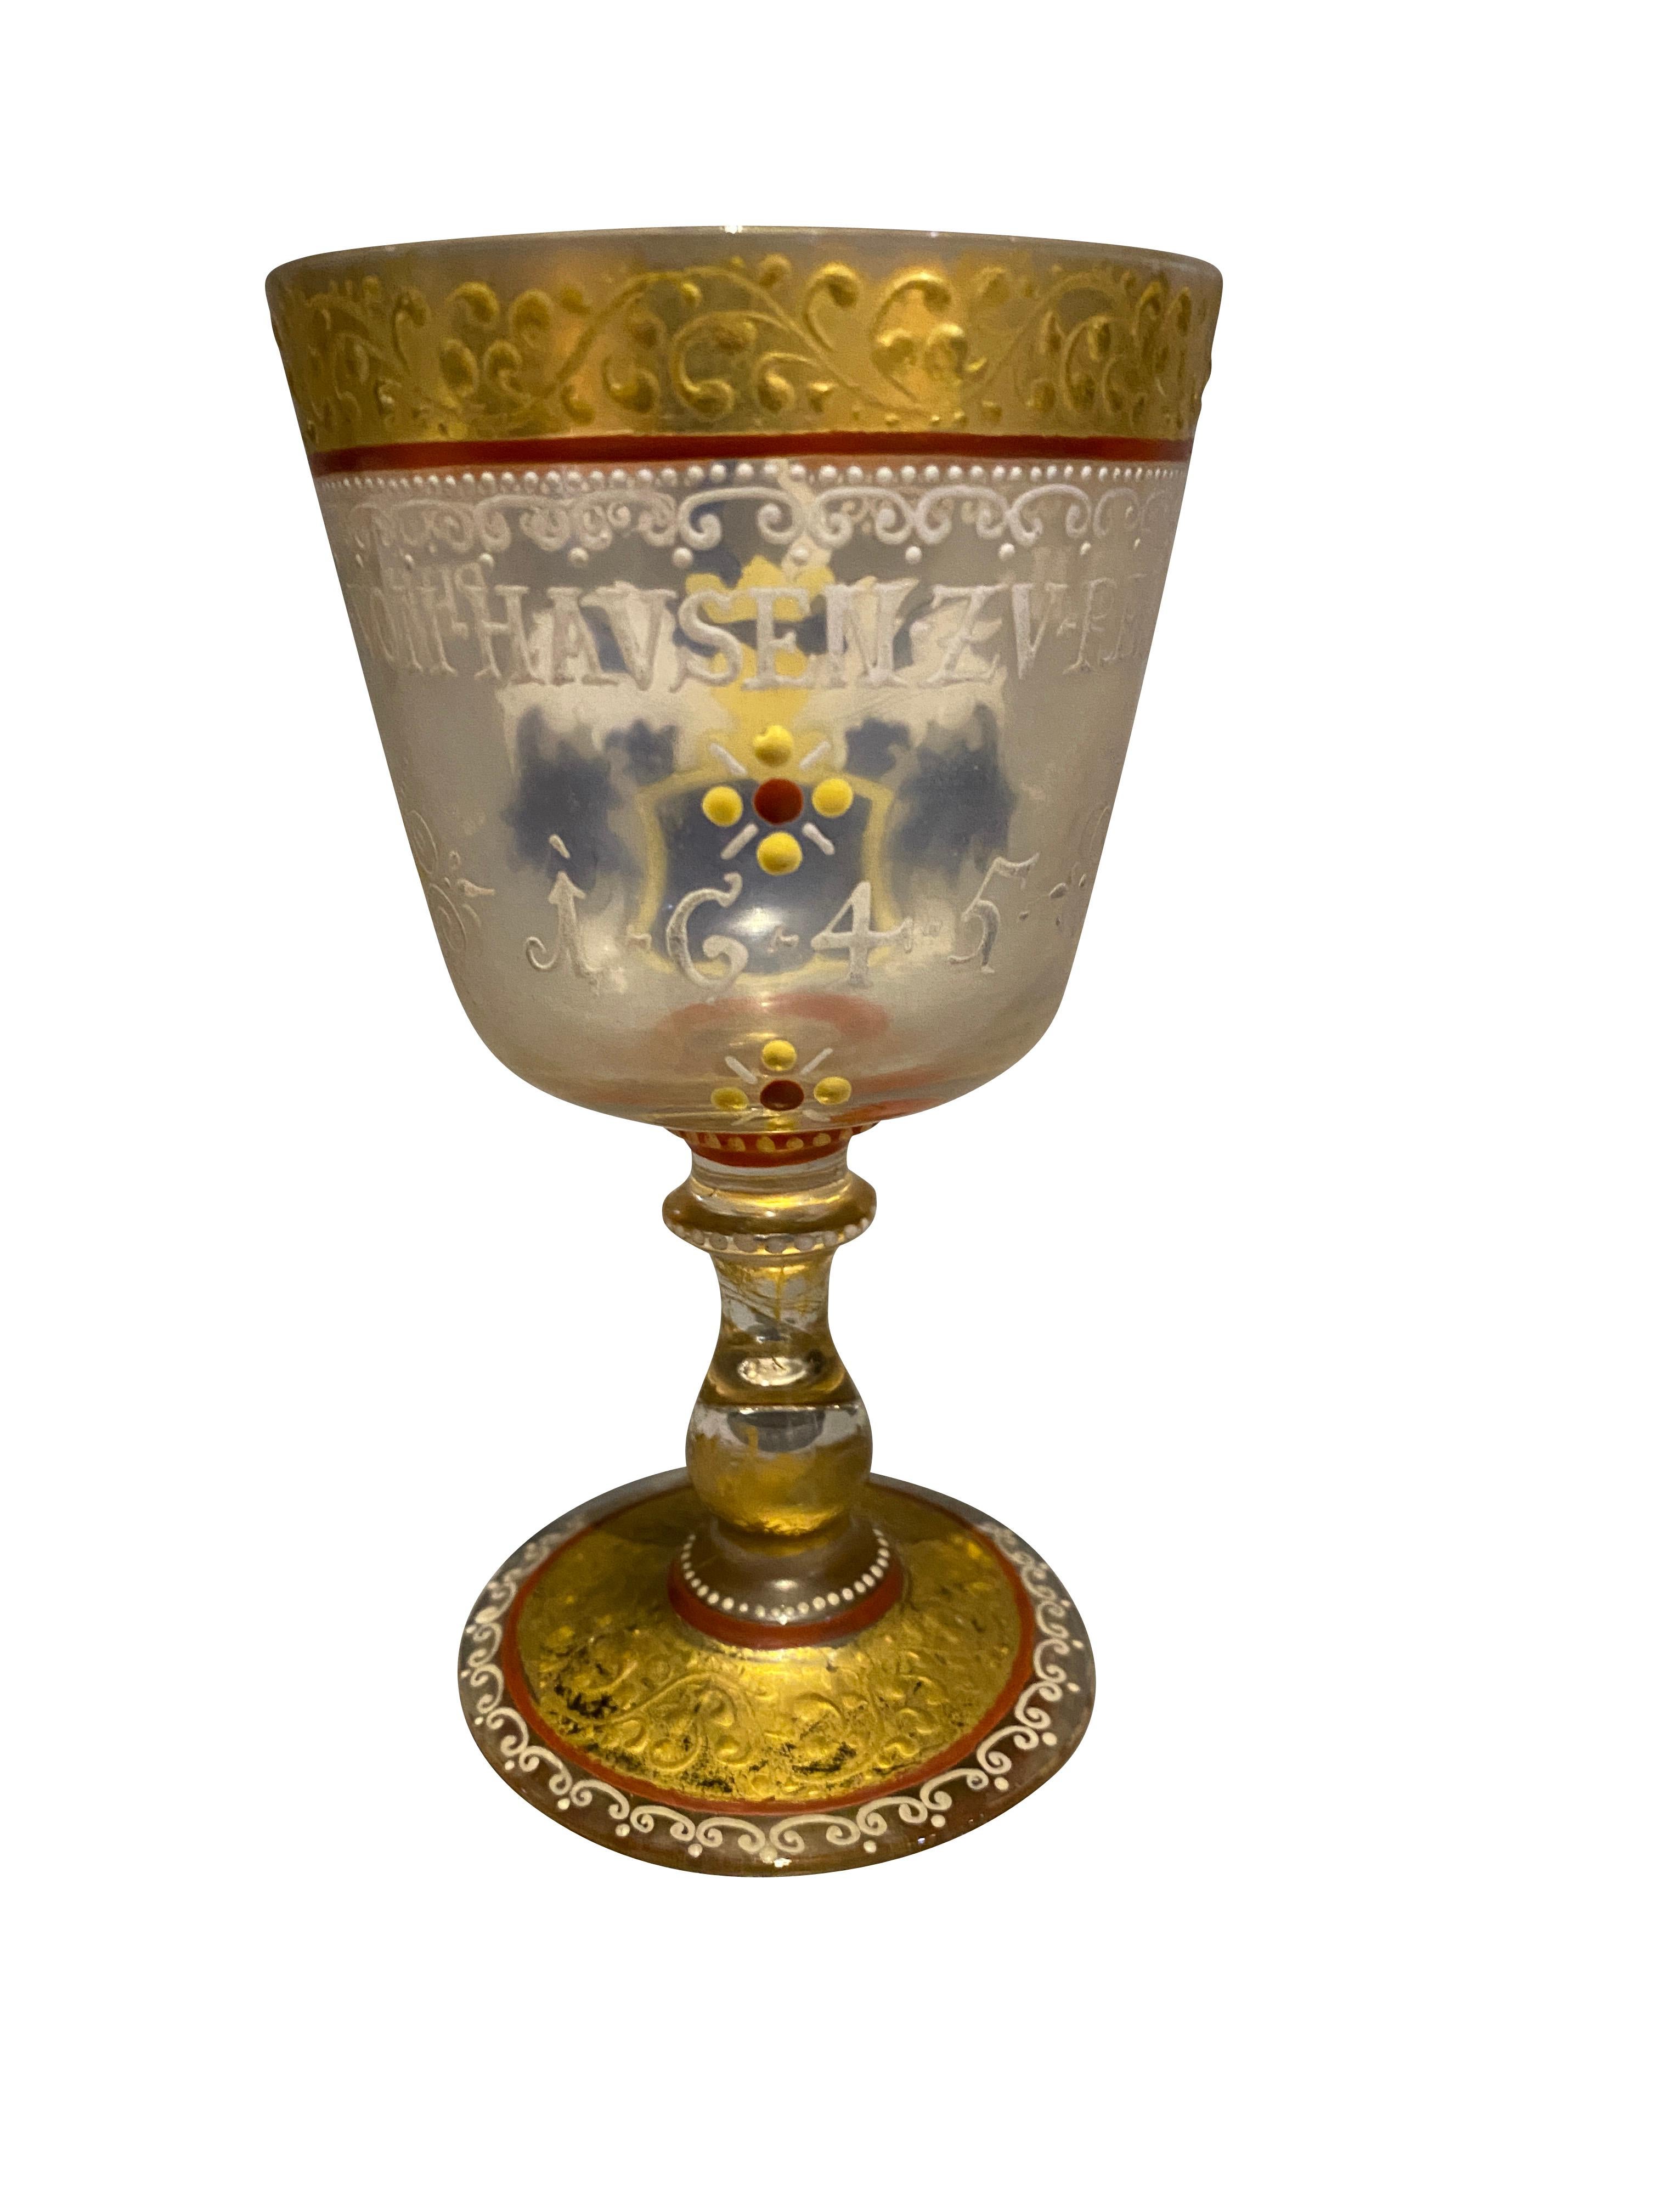 With coat of arms and gilding, circular foot. Inscribed Philips Von Havsen Zv Rehlingen.